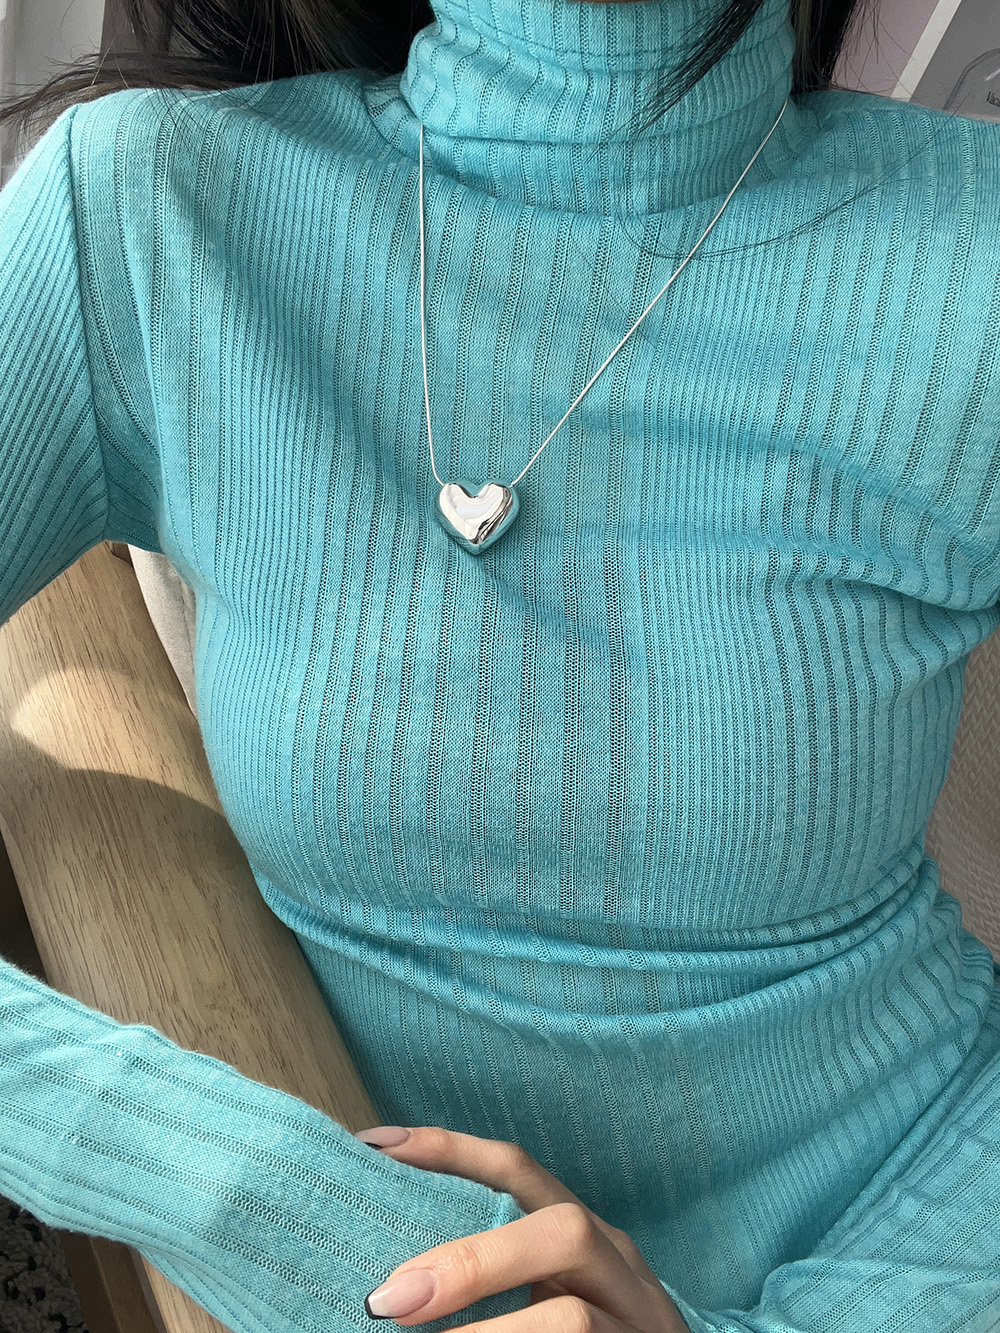 [92.5 silver] plump heart necklace